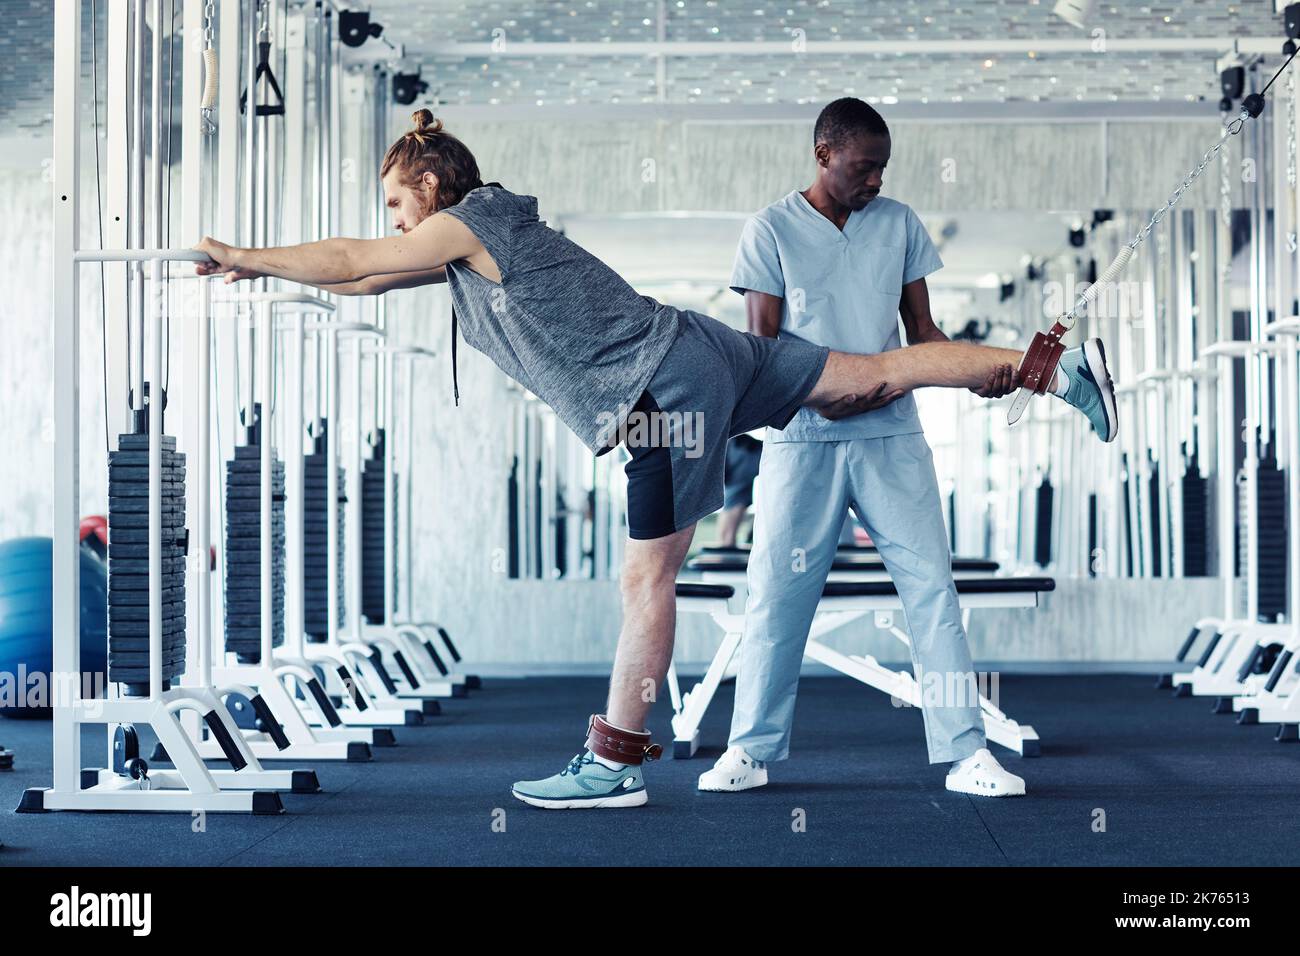 Young patient exercising in gym with the help of therapist during rehabilitation Stock Photo